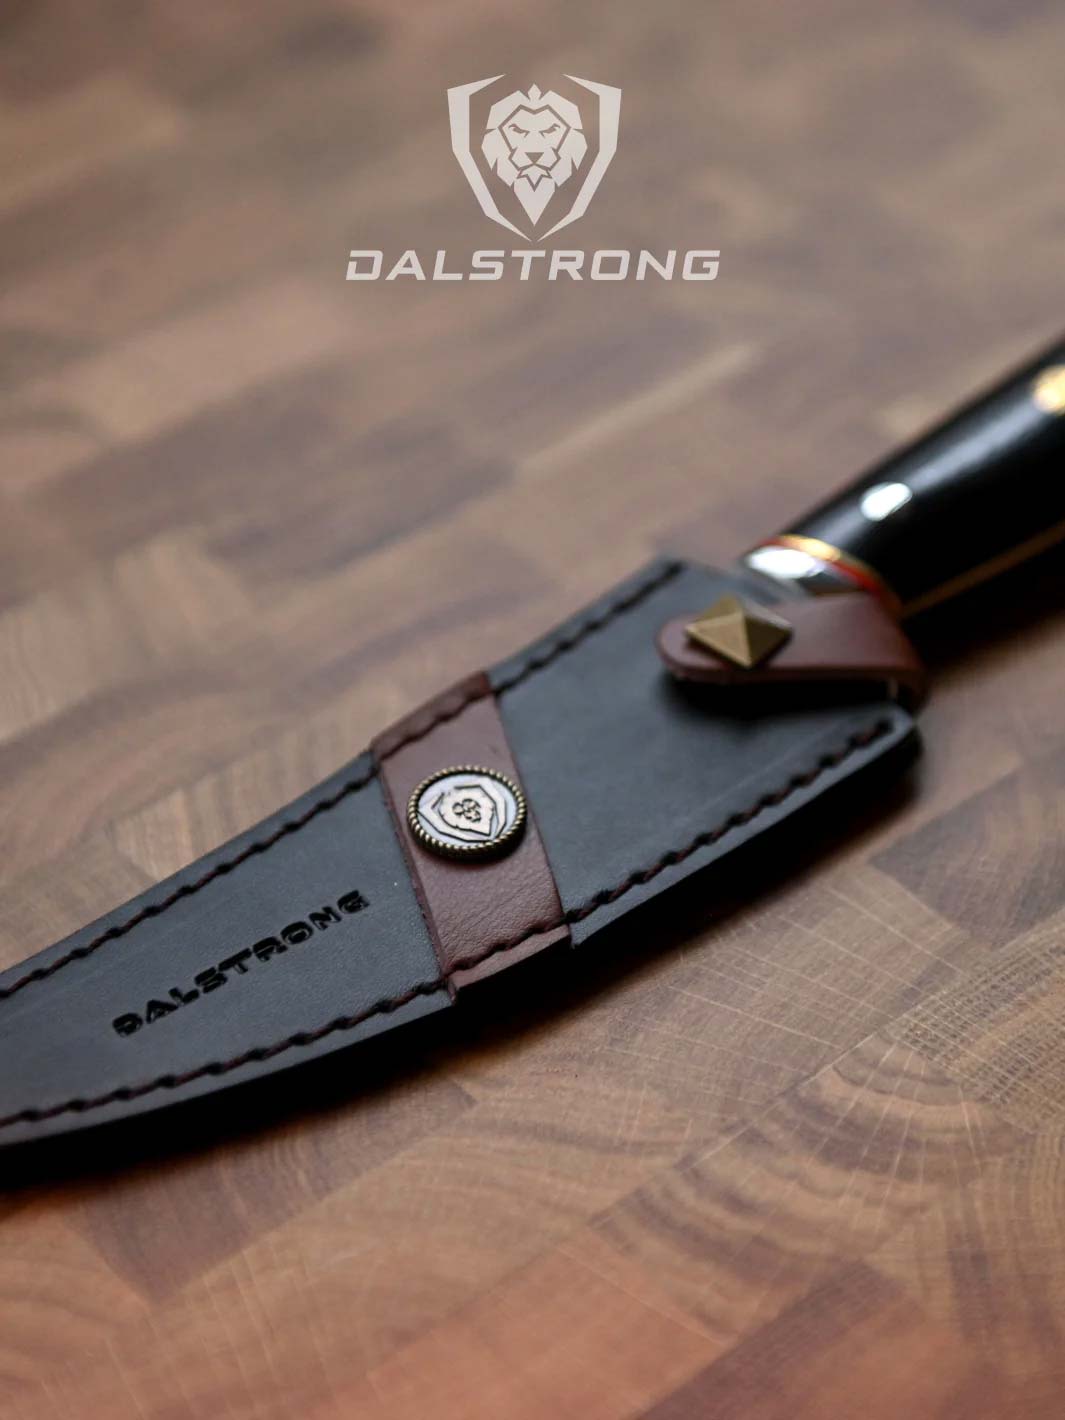 Dalstrong centurion series 6 inch curved boning knife inside it's sheath.